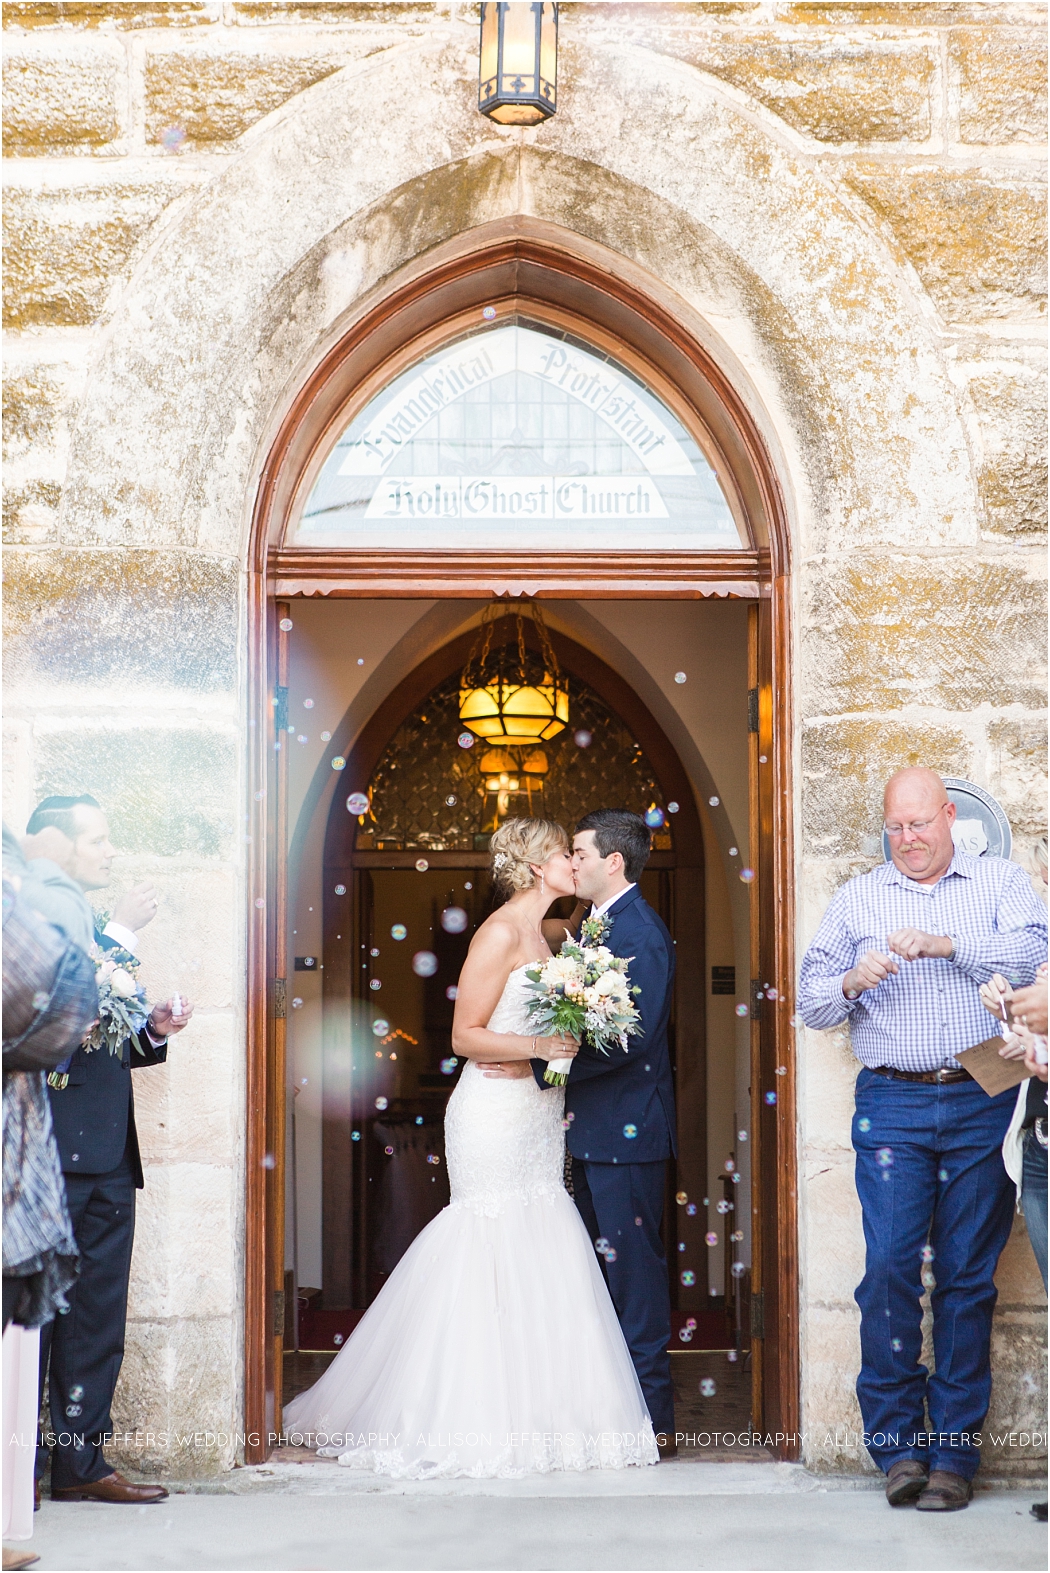 pastel-wedding-at-holy-ghost-lutheran-church-in-fredericksburg-texas-fredericksburg-wedding-photographer_0038-1